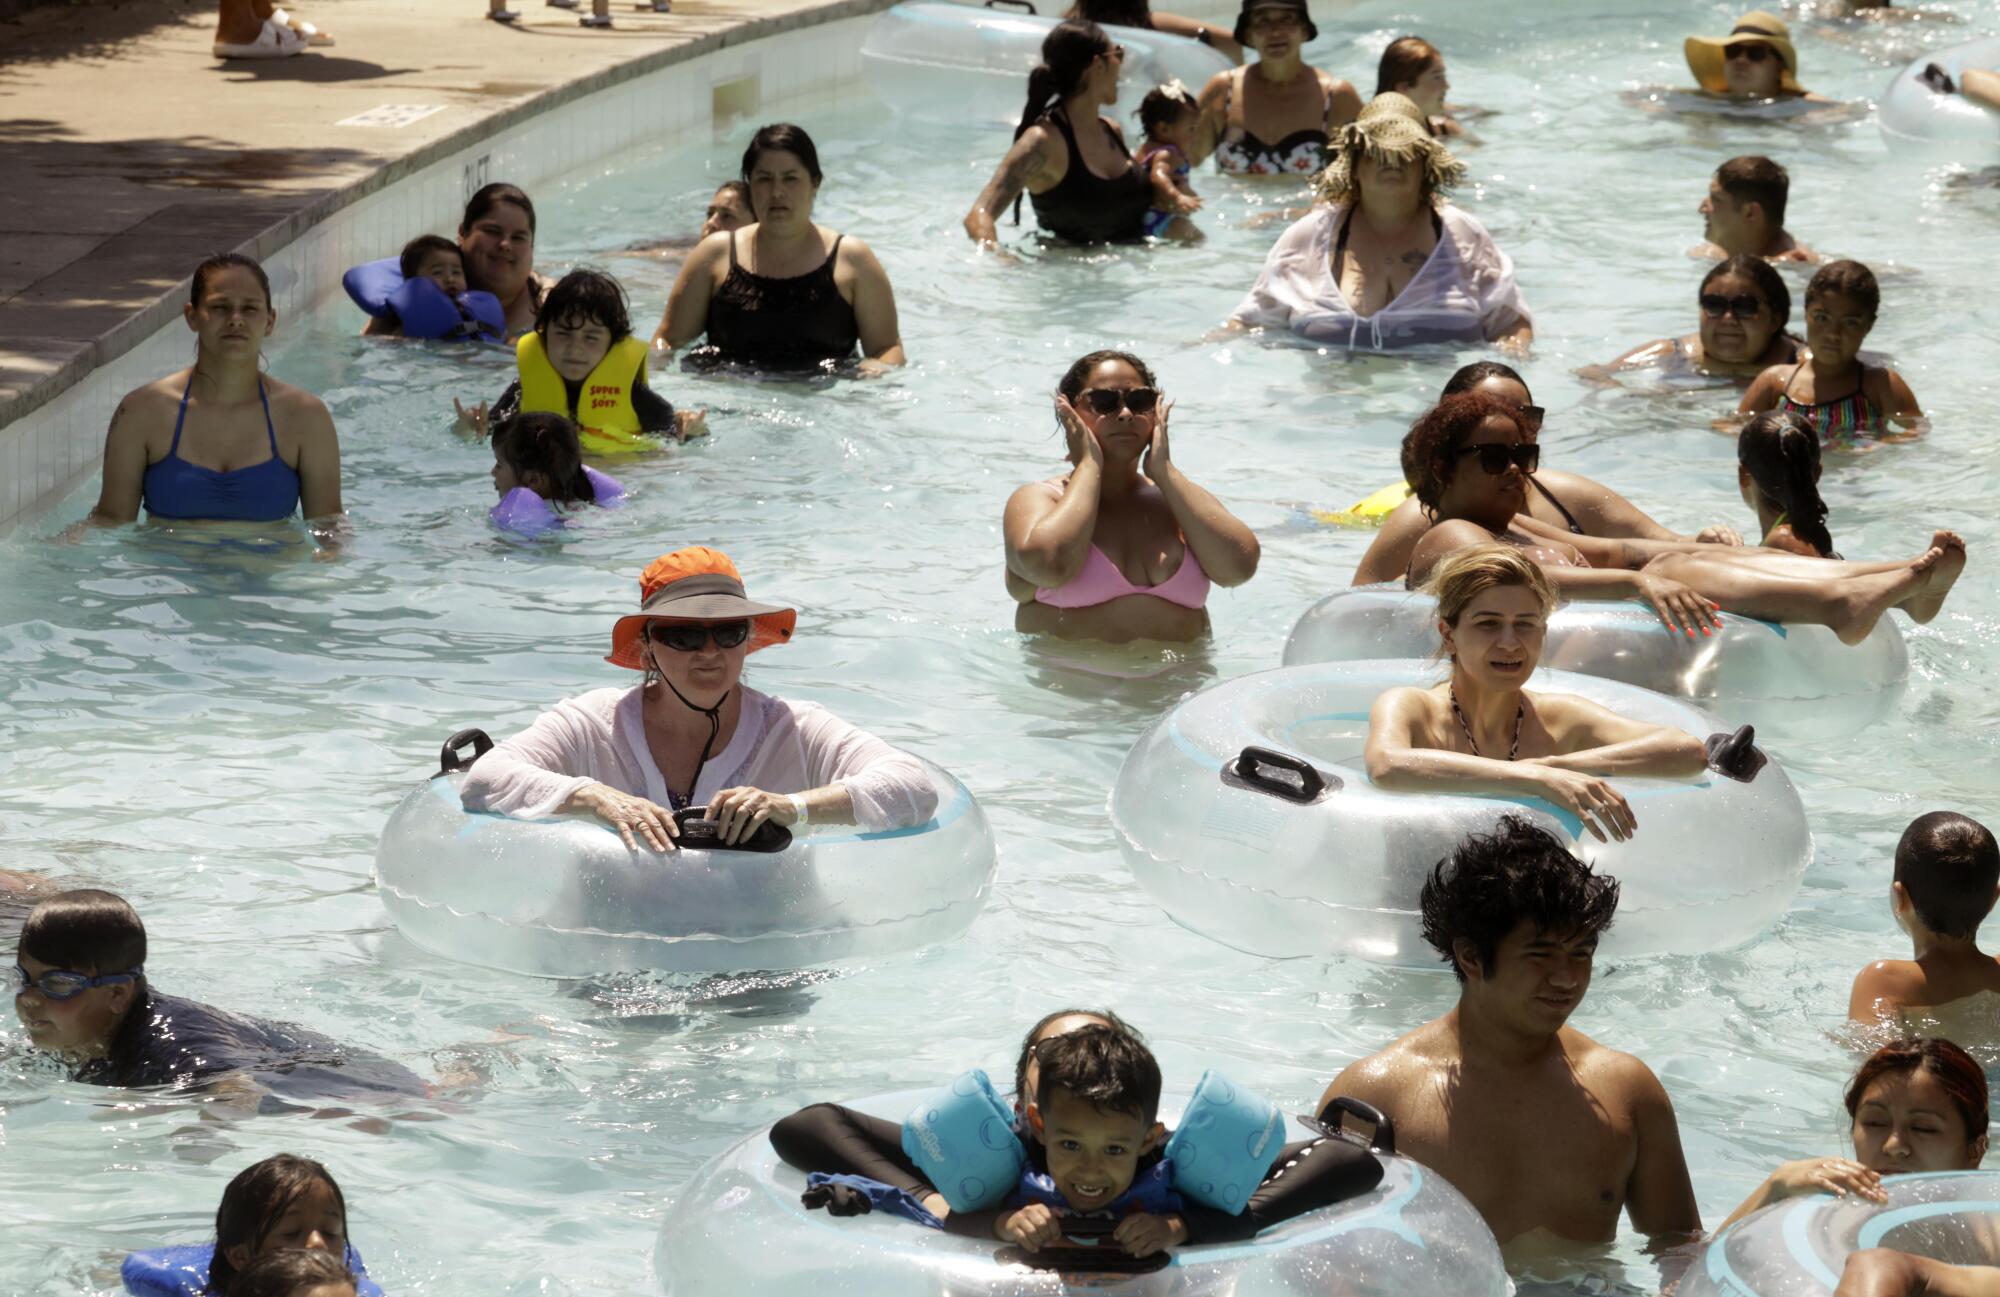 People cool off at Dry Town Water Park where temperatures reached 108 degrees by 3 p.m. in Palmdale on Sunday.